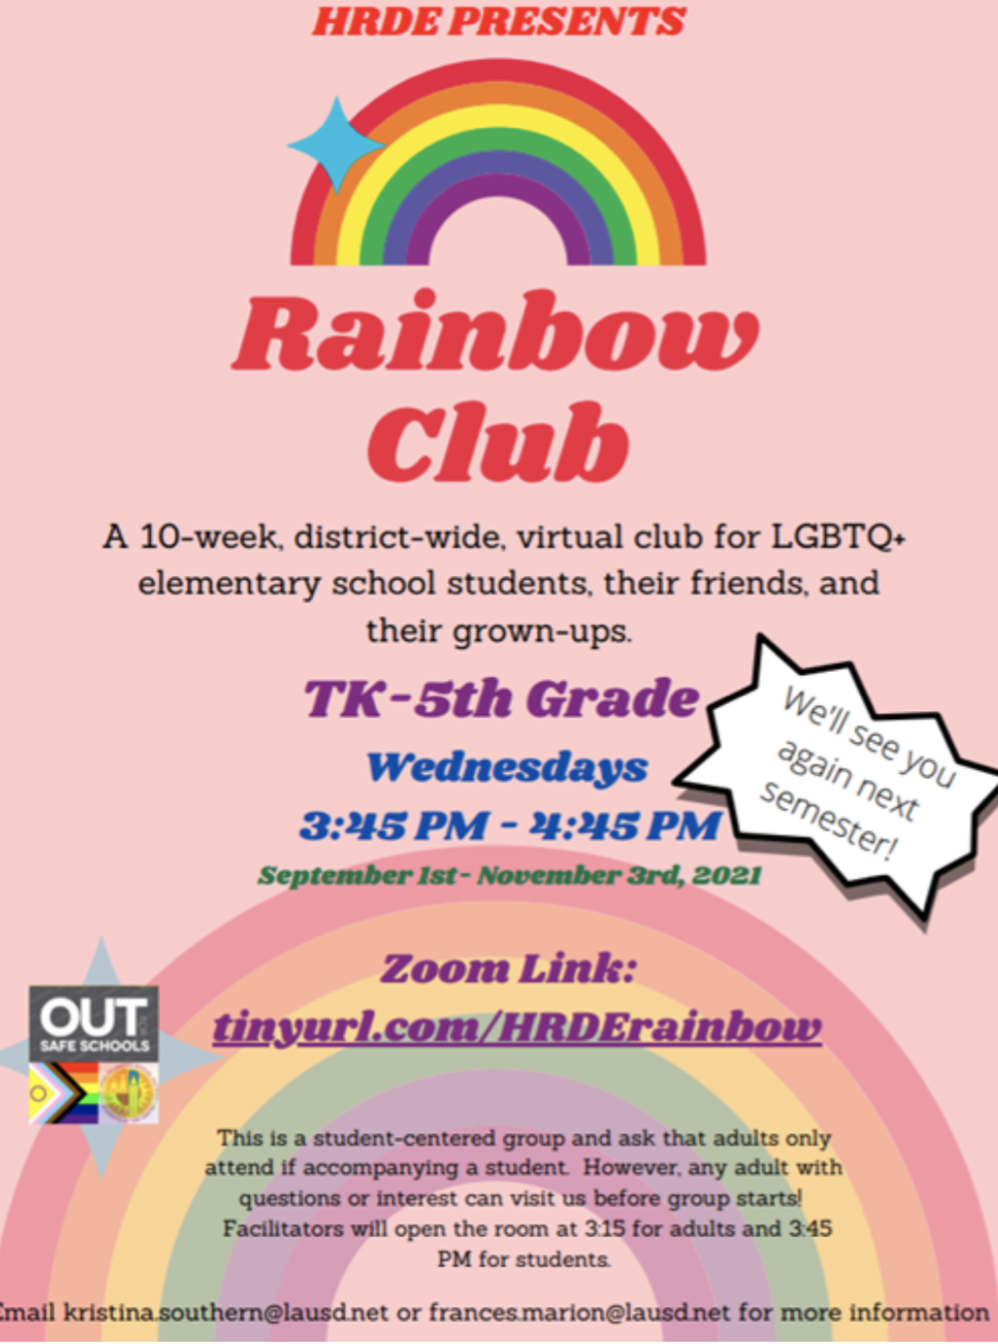 LA Schools Host LGBT Club For 4-Year-Olds, Teach 'Two Spirit' Sexuality